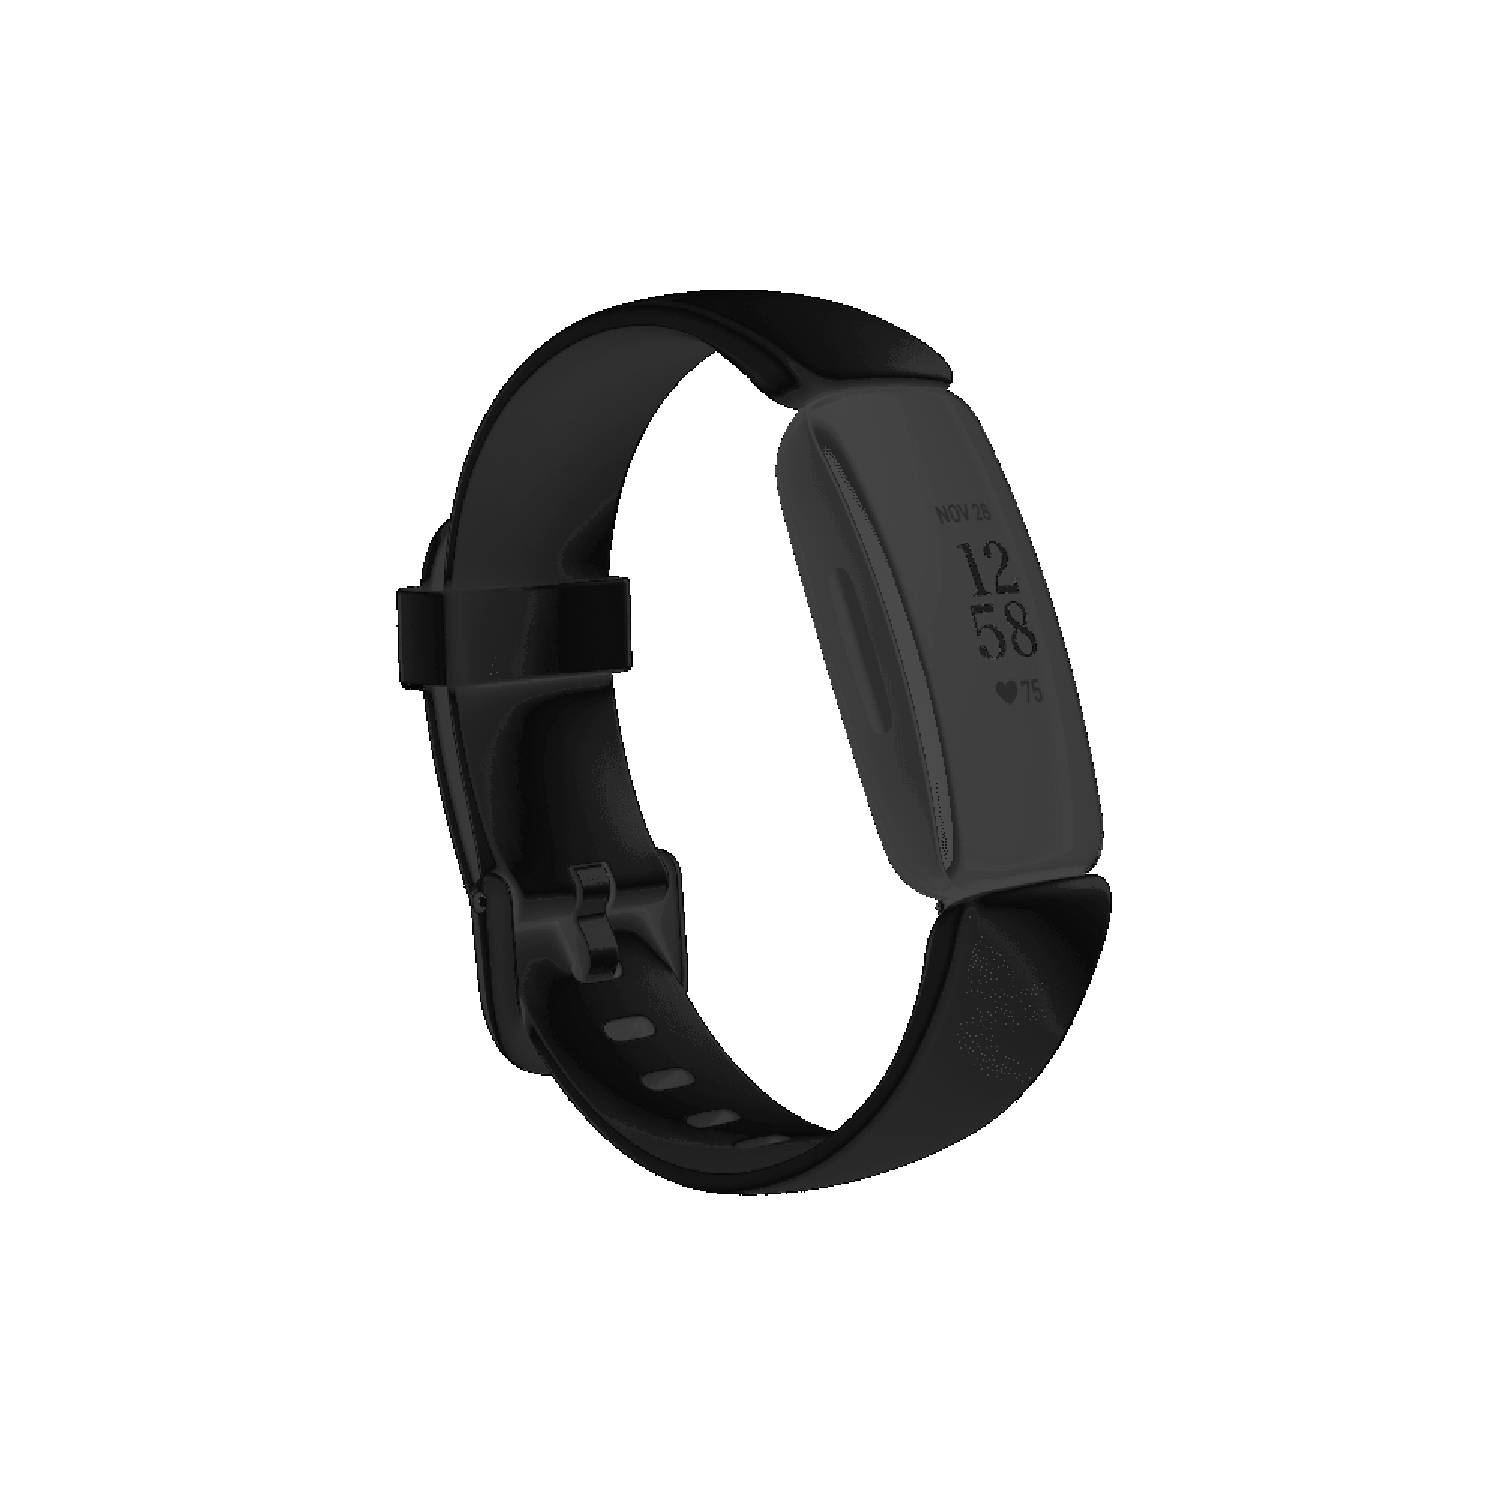 Buy Fitbit Inspire 2 Fitness Wristband Tracker